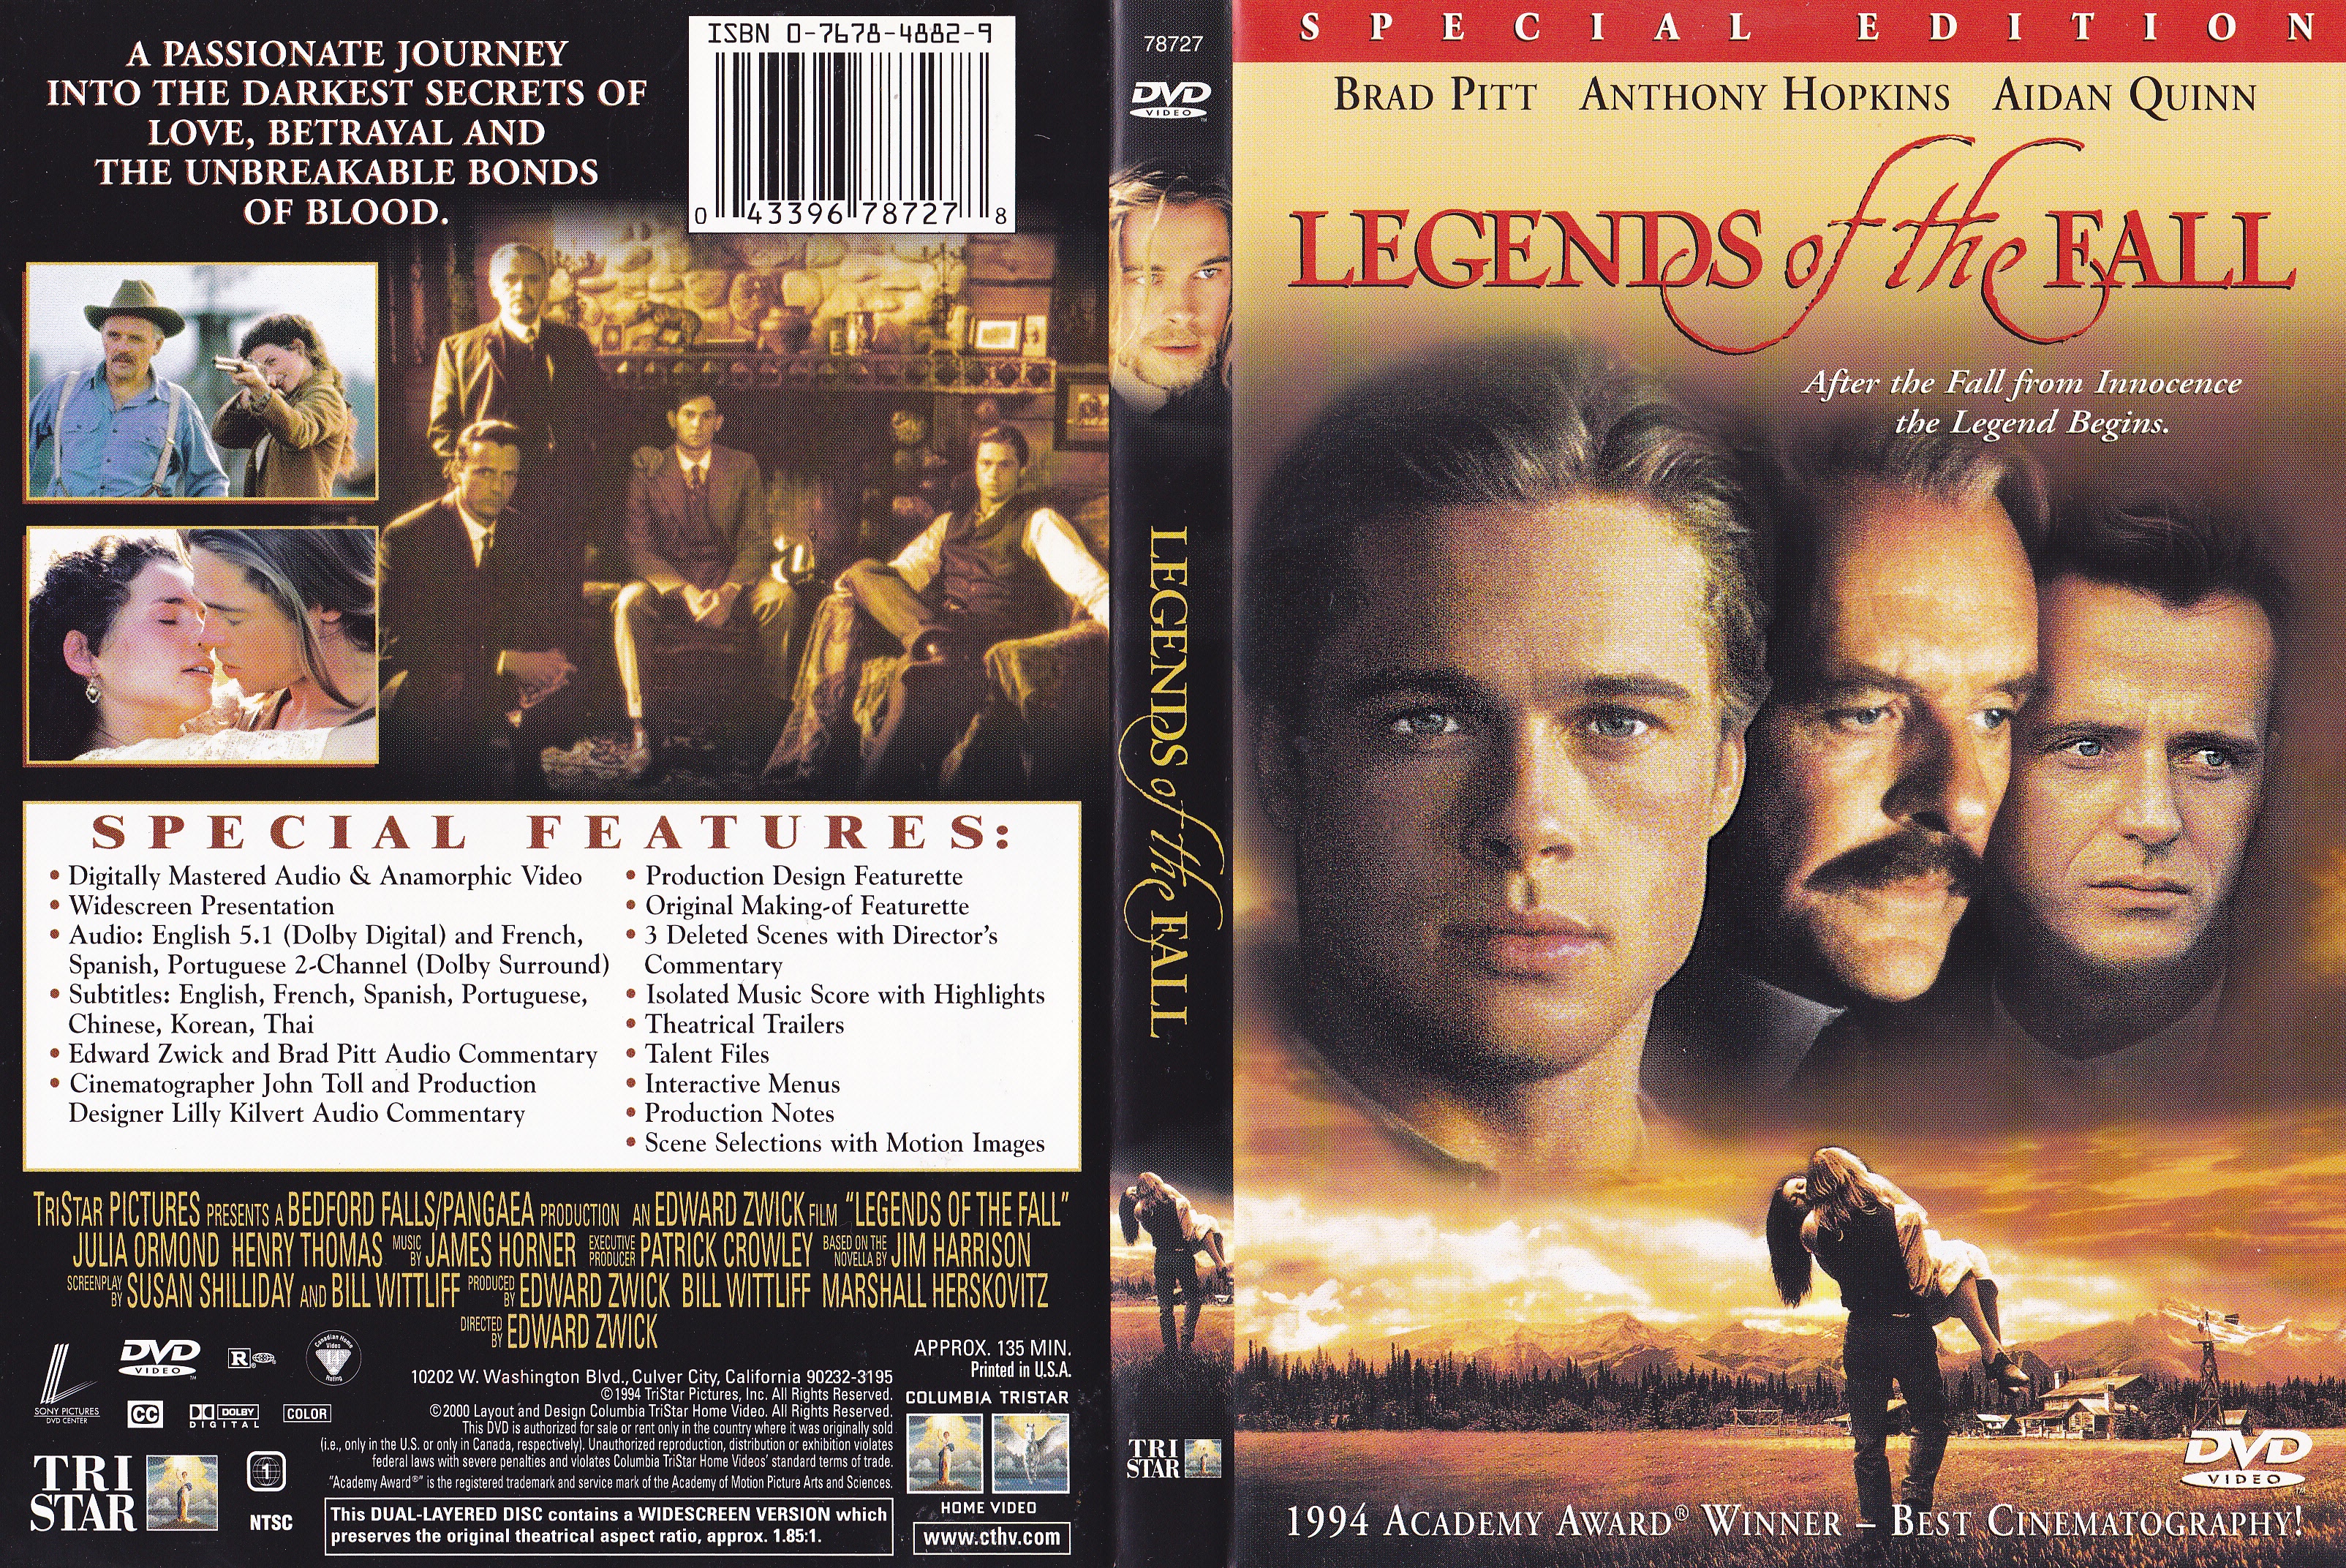 Jaquette DVD Legends of the fall - Lgendes d